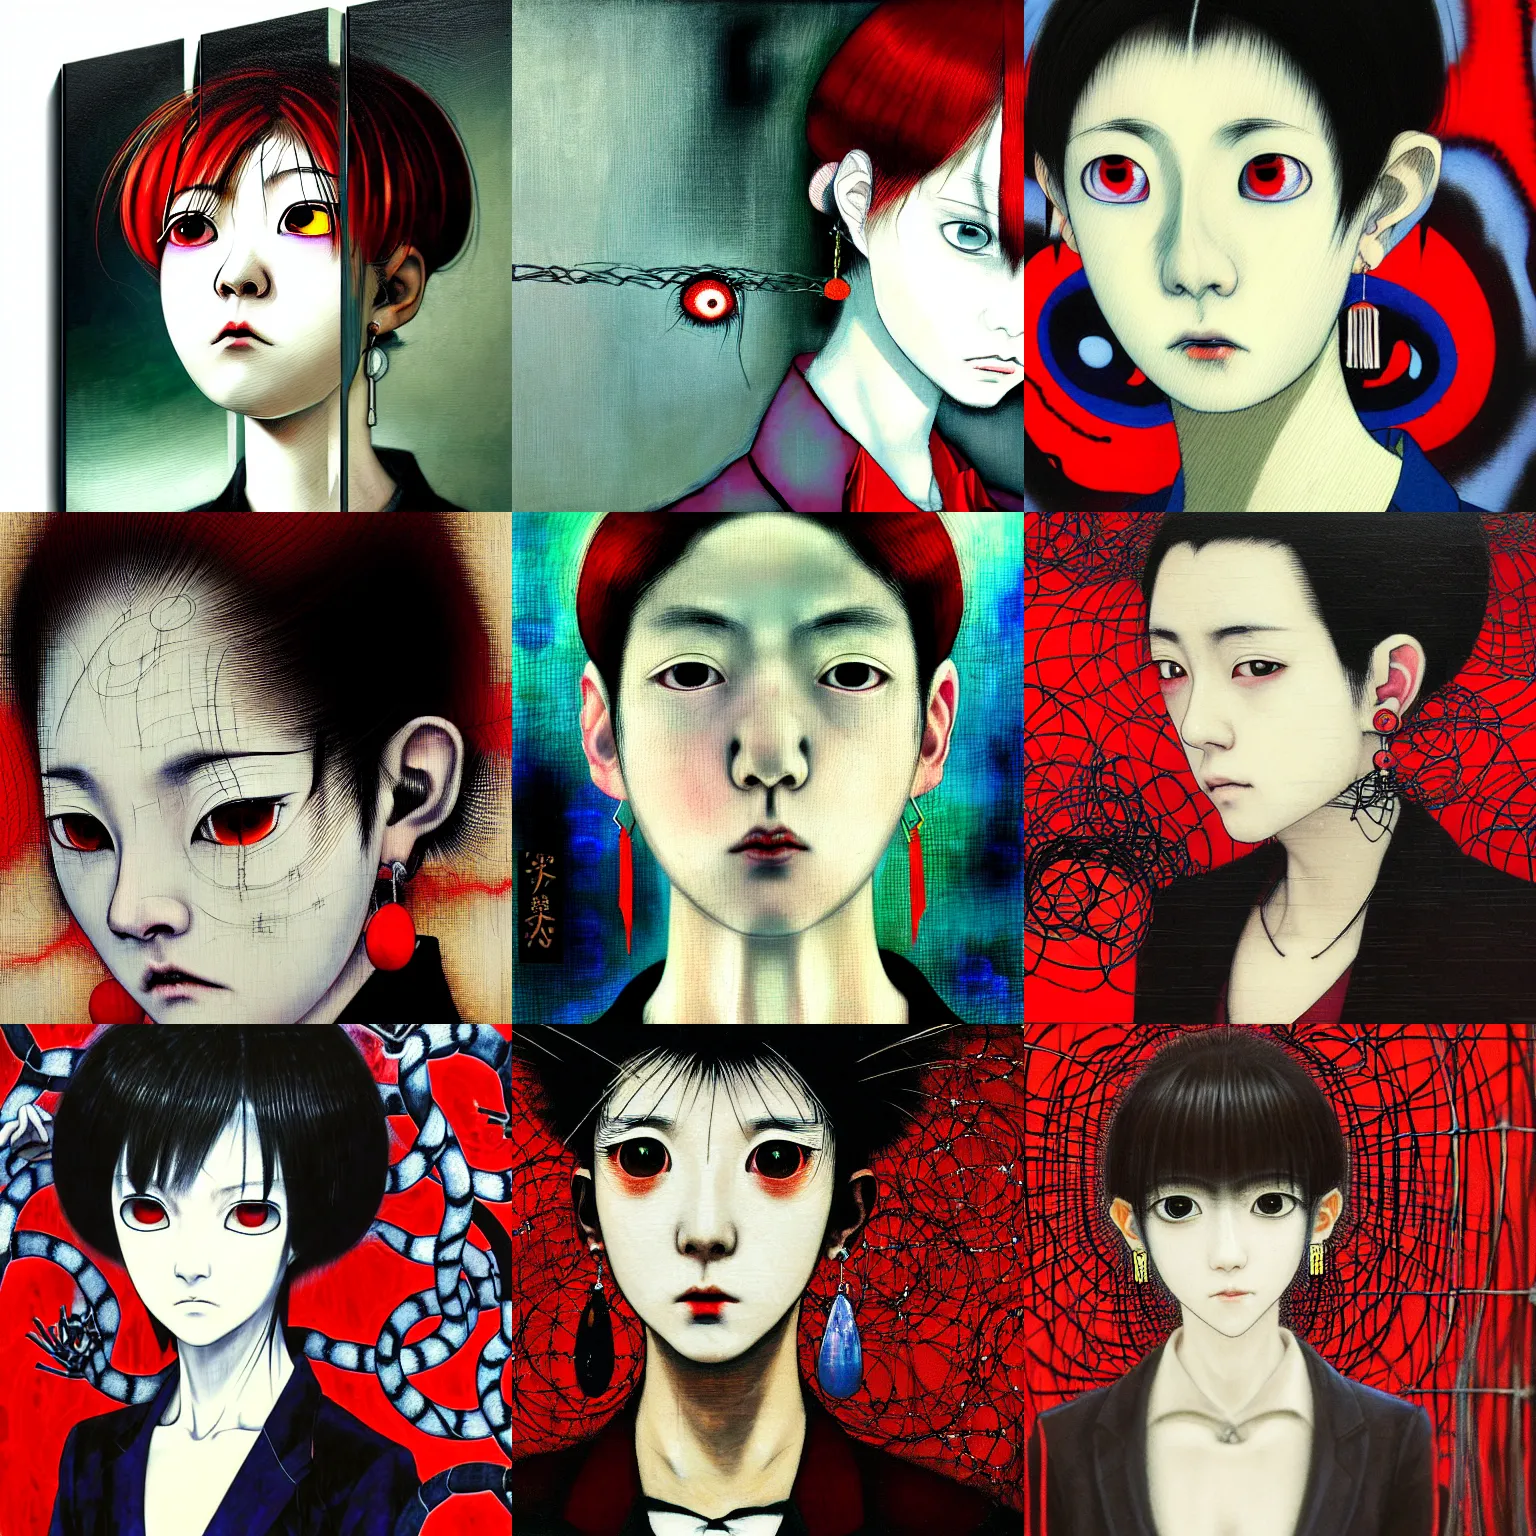 Prompt: yoshitaka amano blurred and dreamy realistic three quarter angle portrait of a sinister young woman with short hair, big earrings, and red eyes wearing office suit with tie surrounded by barbed wire, junji ito abstract patterns in the background, satoshi kon anime, noisy film grain effect, highly detailed, renaissance oil painting, weird portrait angle, blurred lost edges